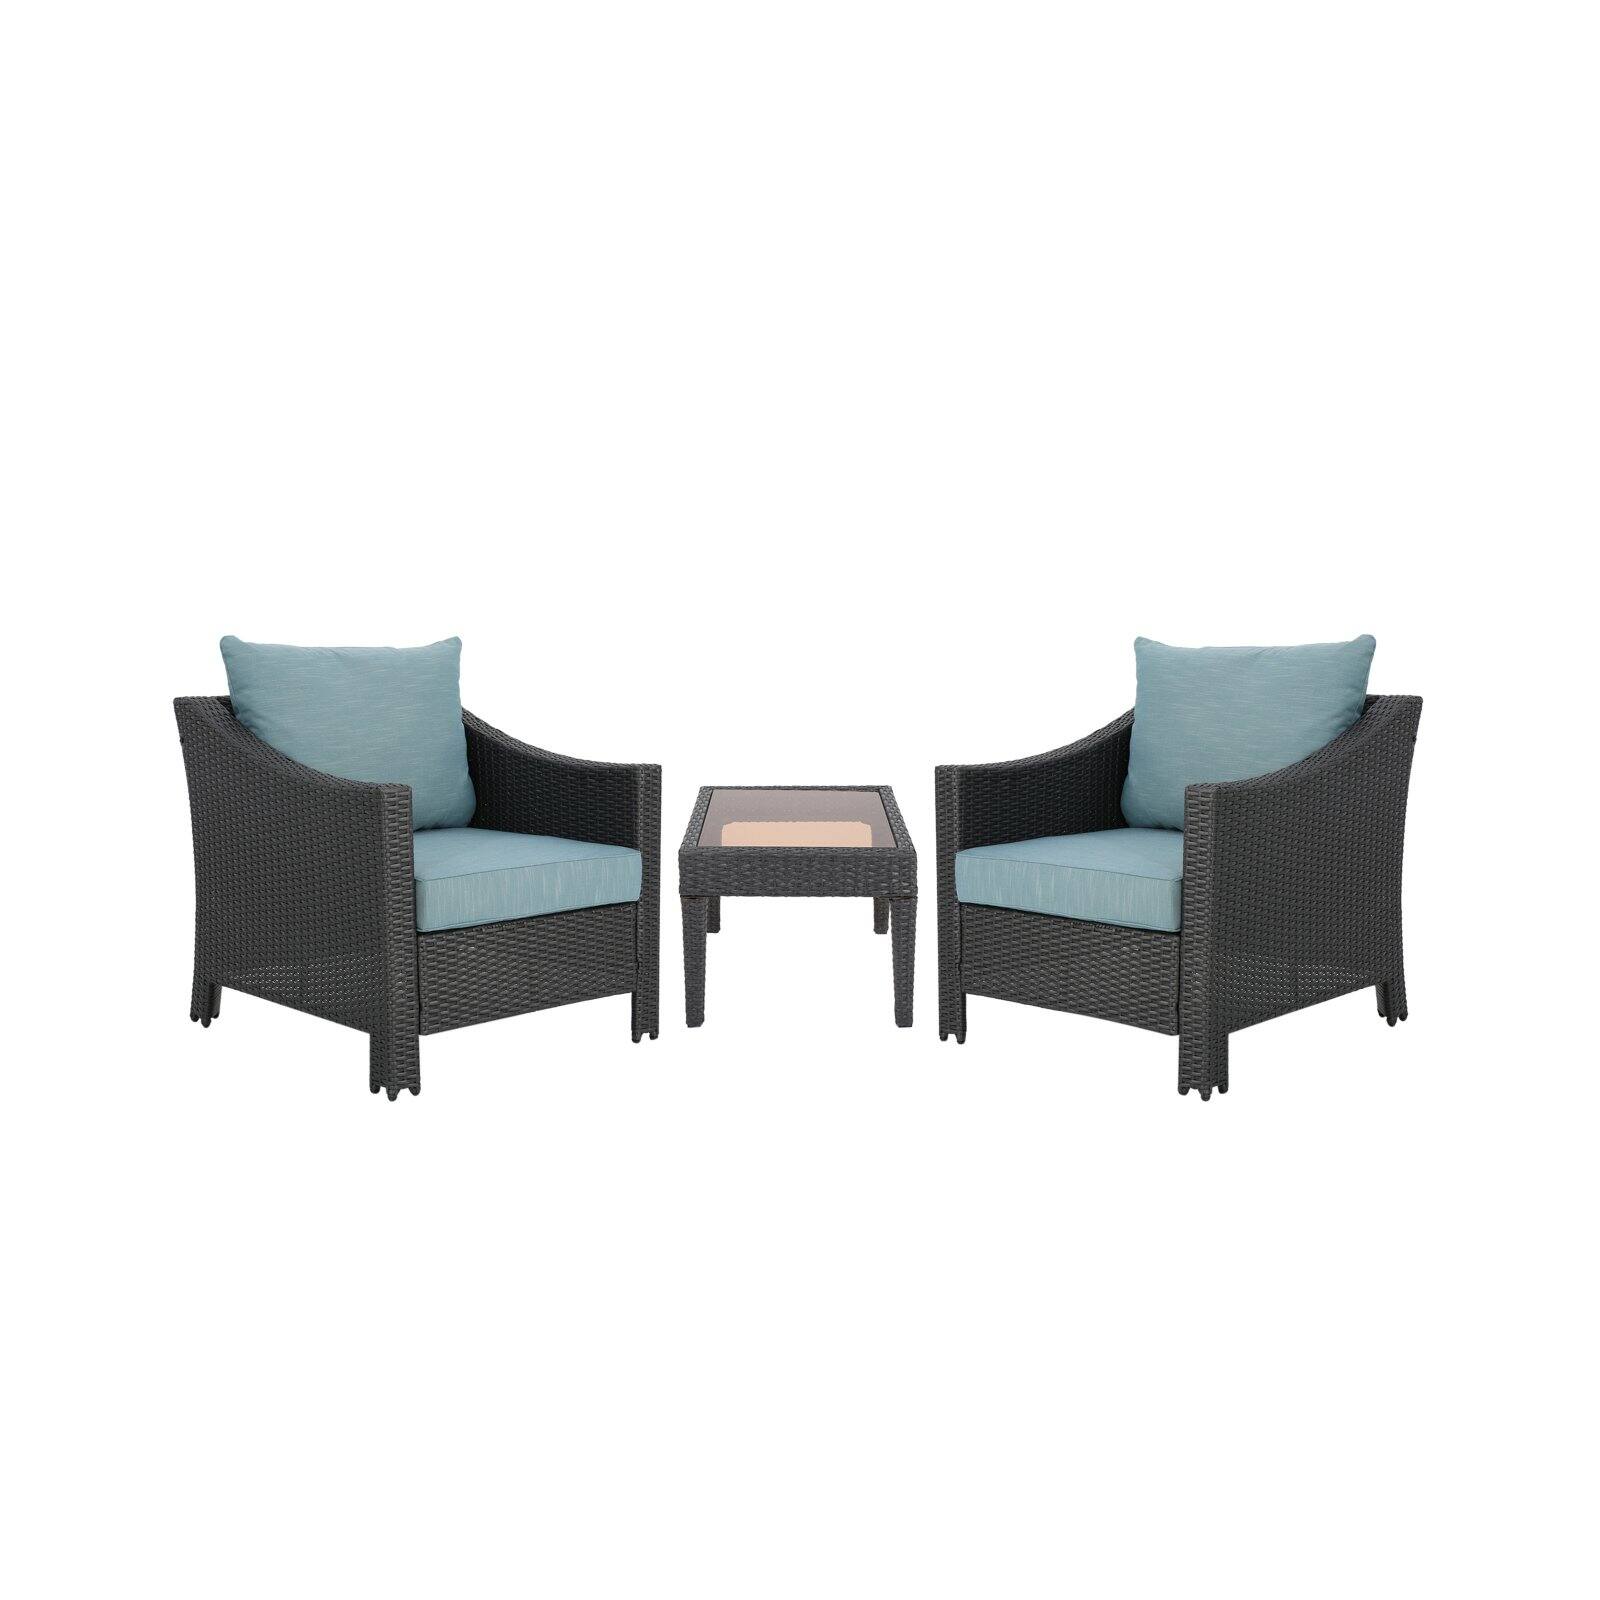 Antibes Wicker 3 Piece Lounge Chair Chat Set - image 1 of 9